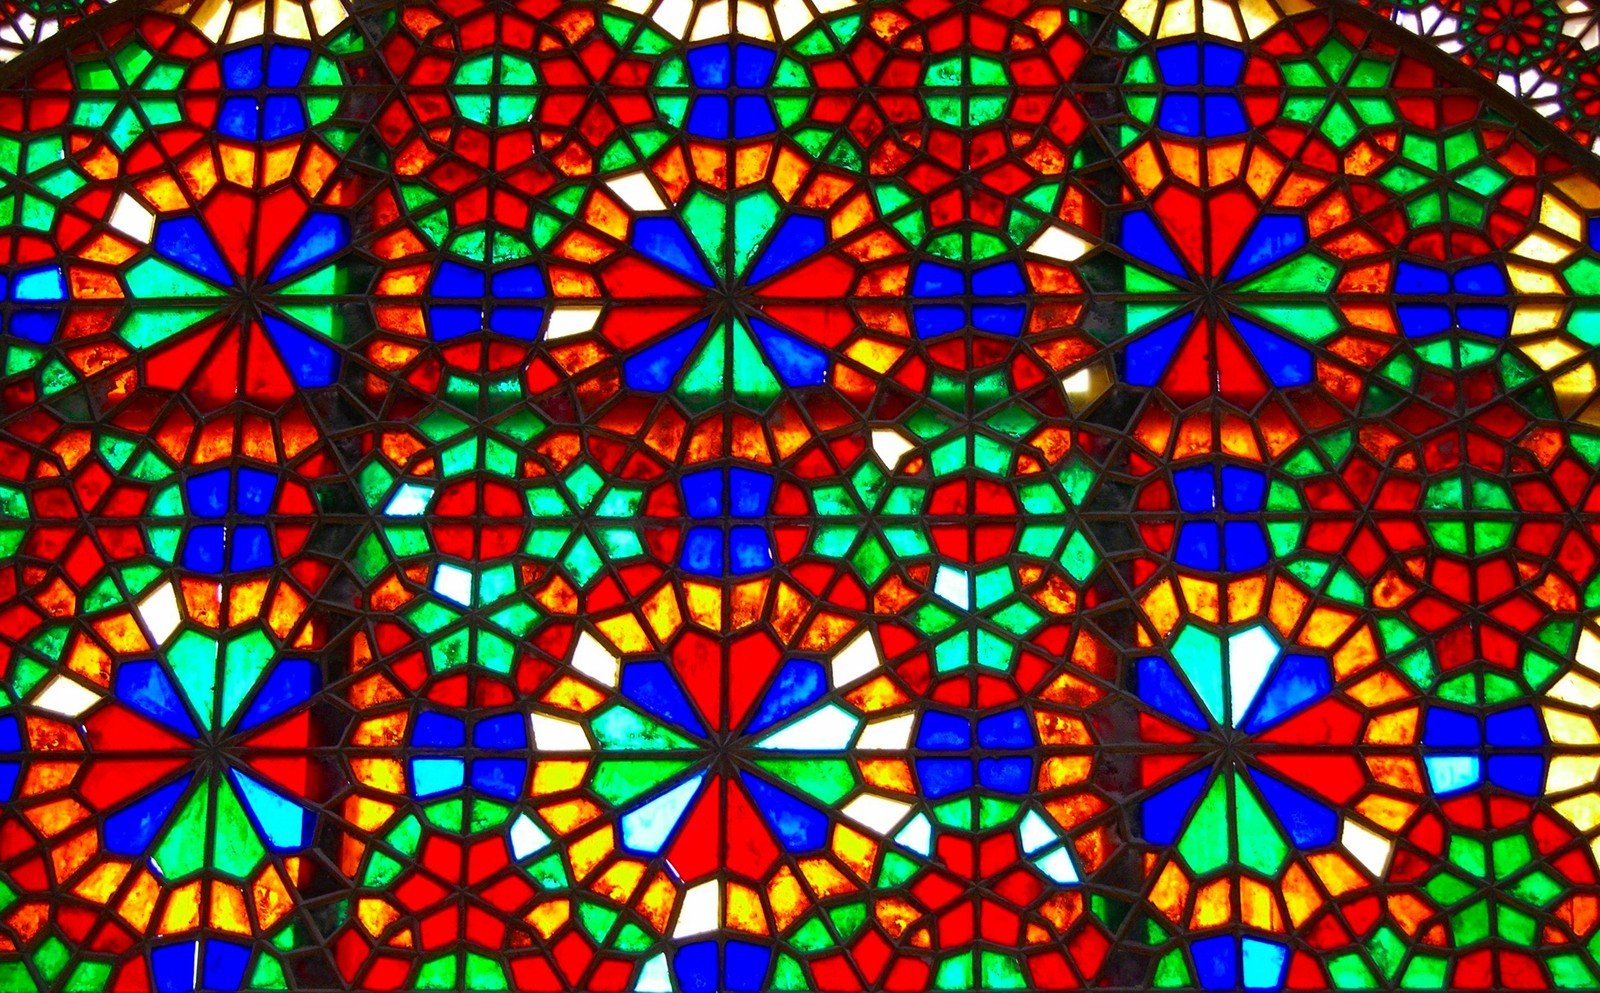 a very colorful stained glass window with circular designs